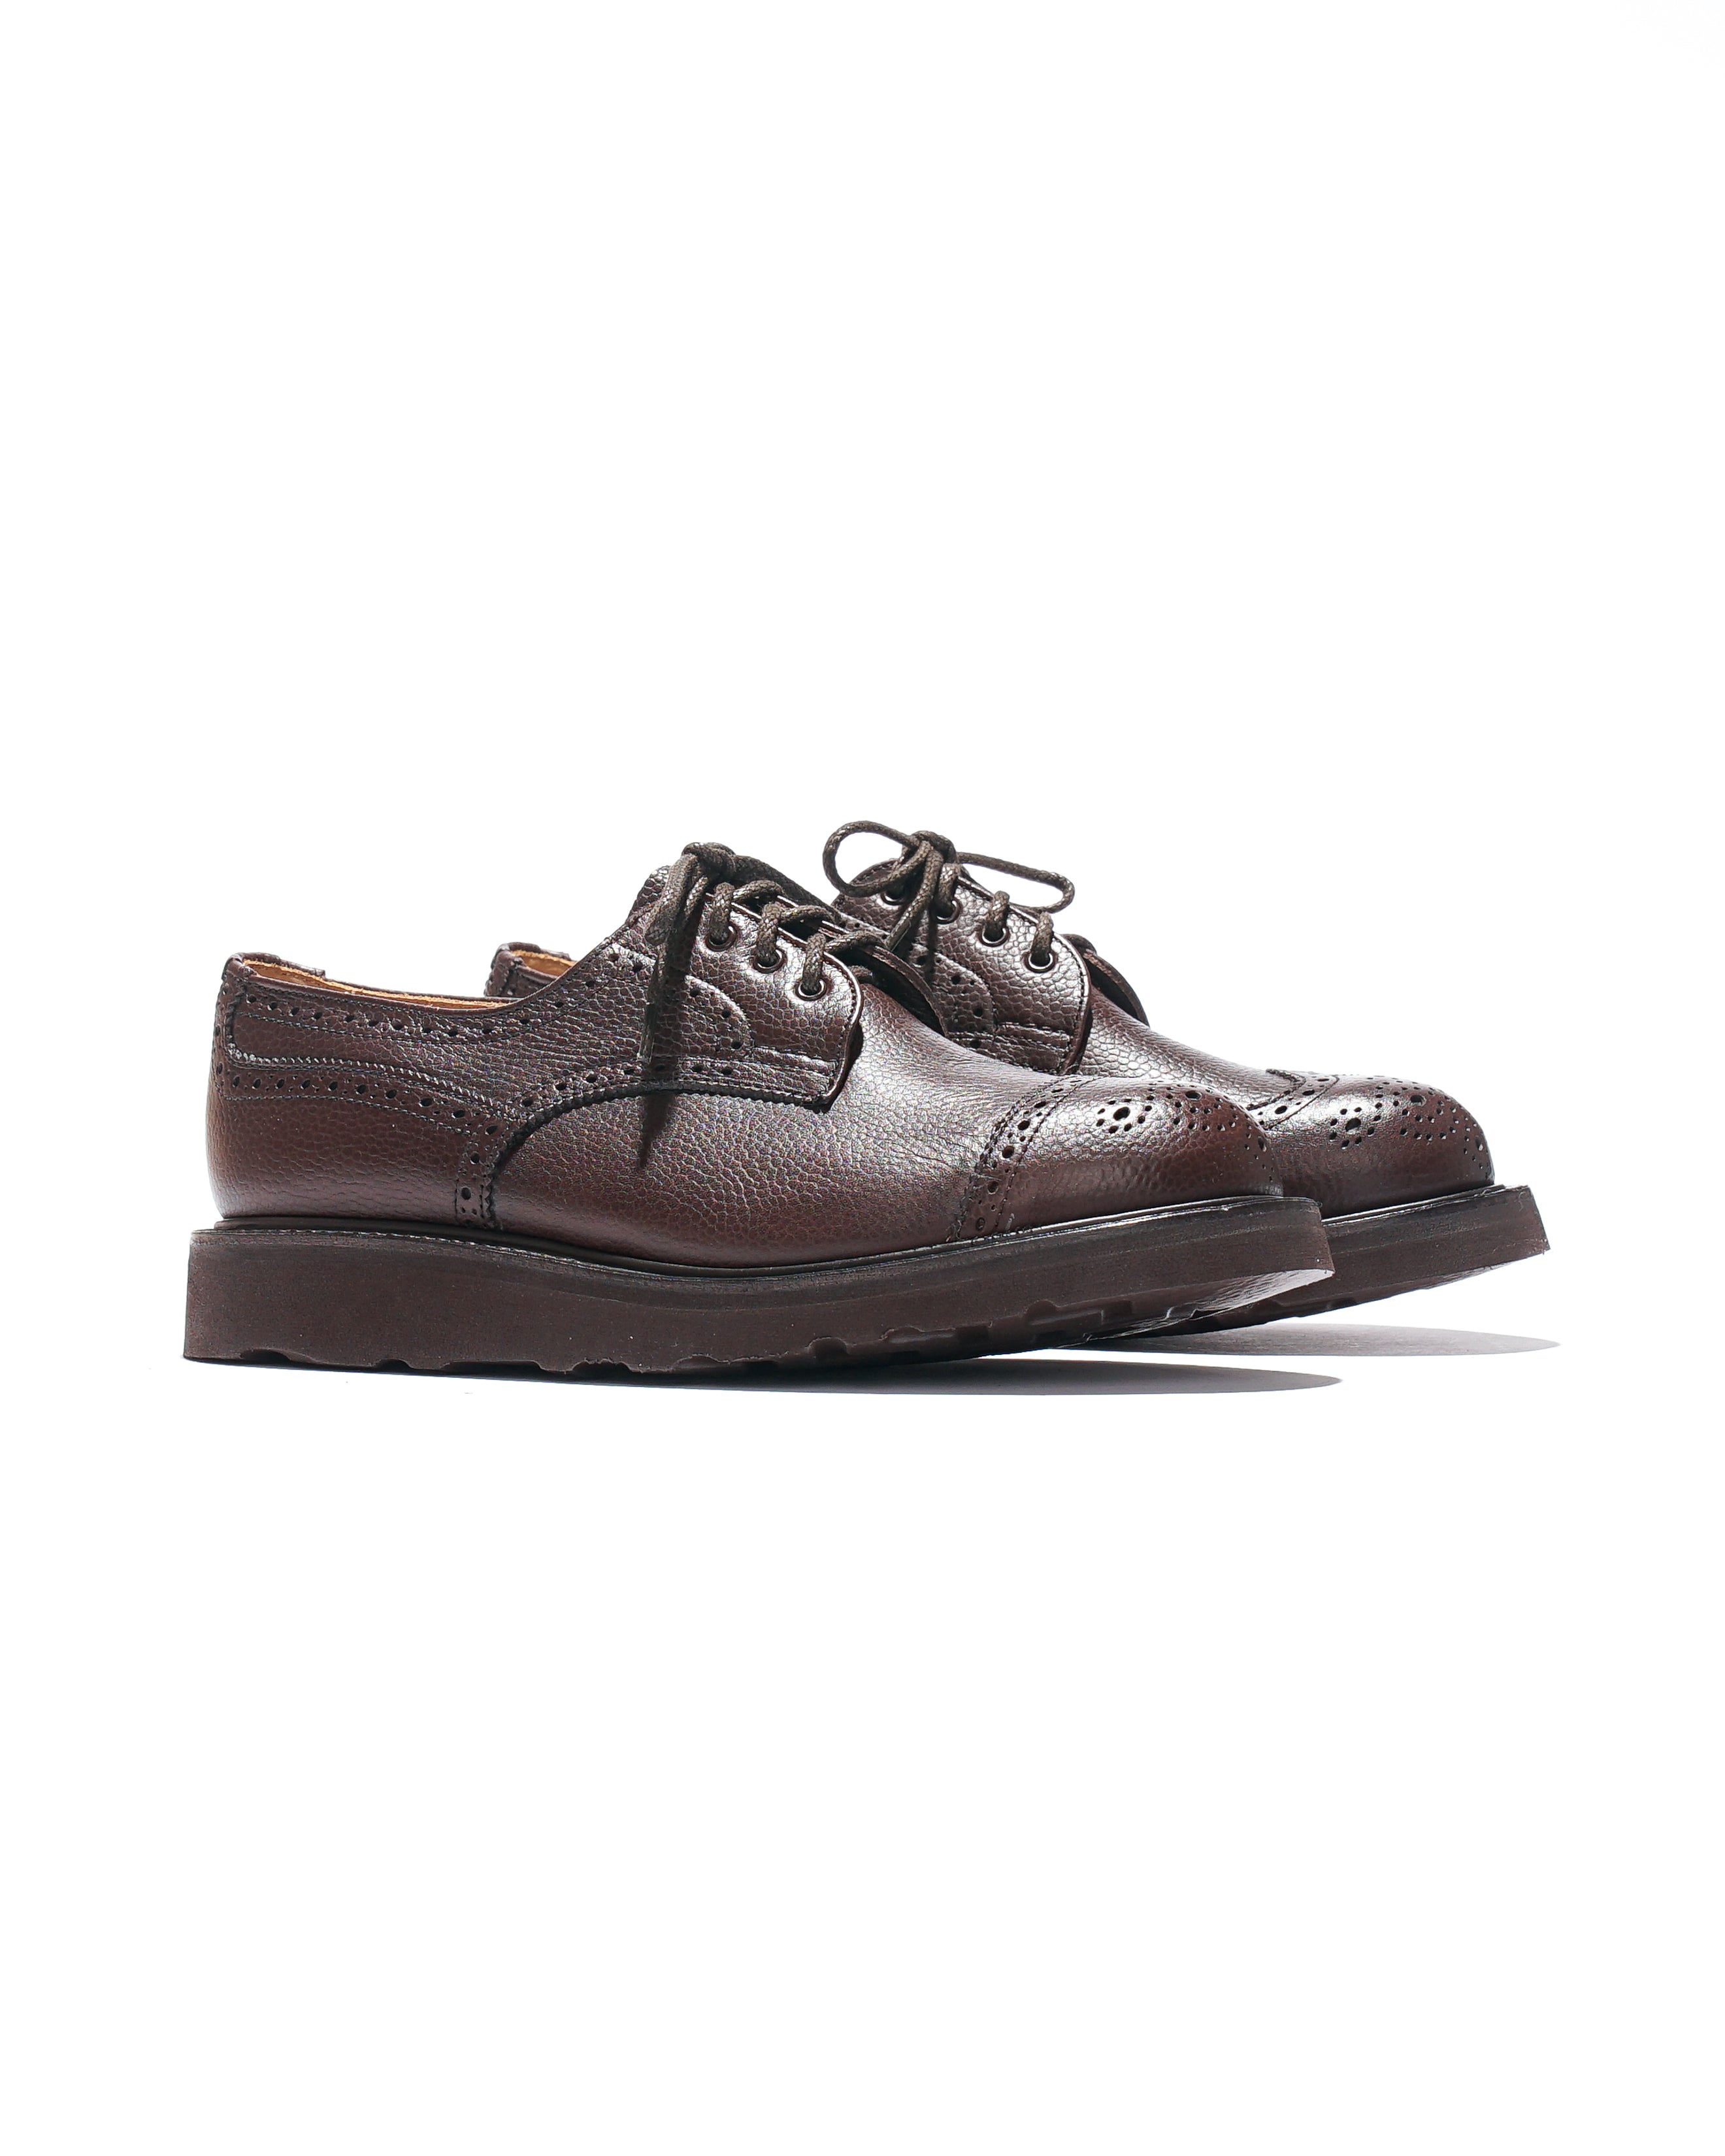 Tricker's - Women's Special | Nepenthes New York